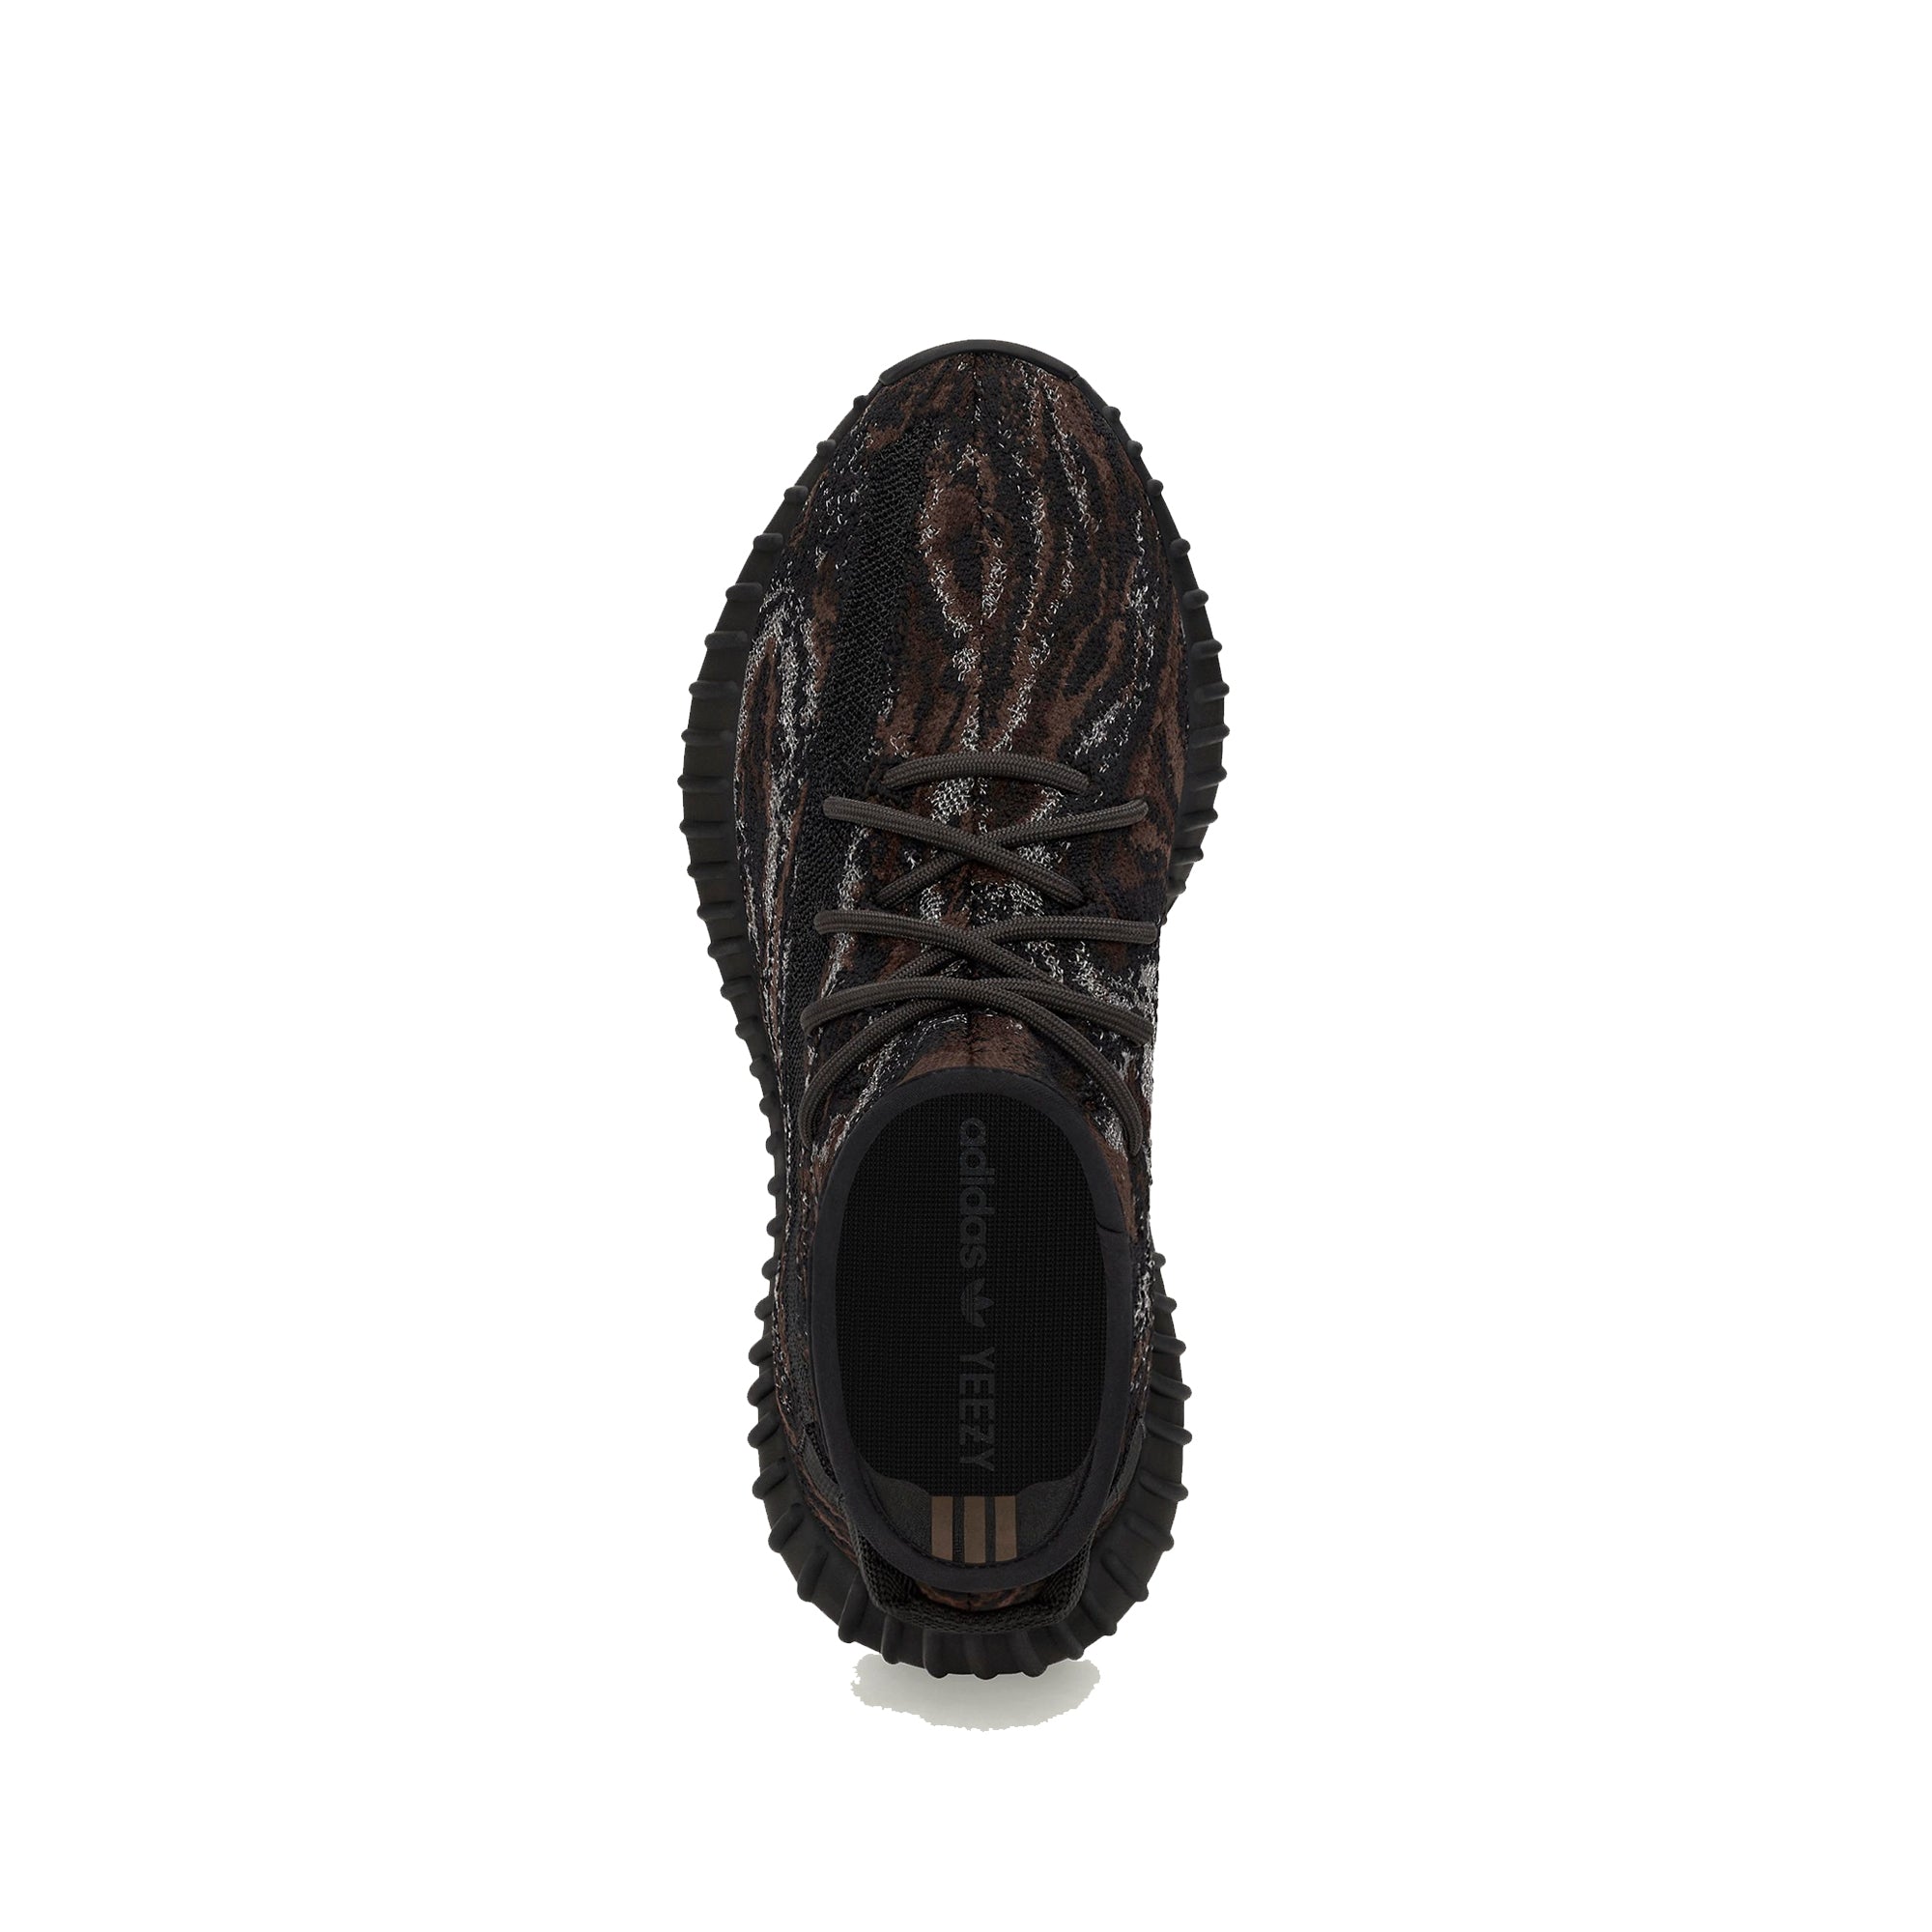 Adidas Yeezy Boost 350v2 MX Rock Shoes